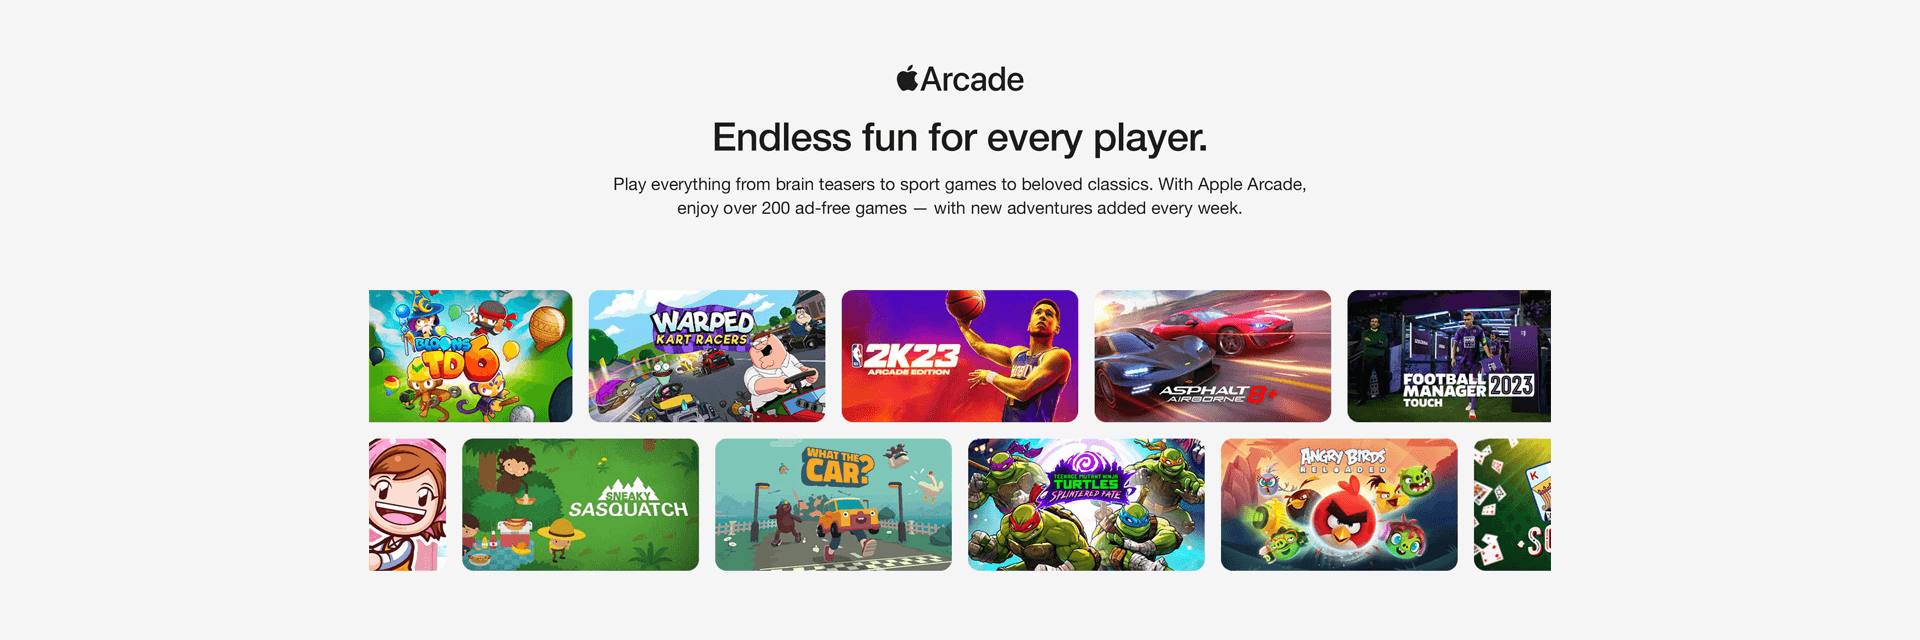 Apple Arcade on EE. Endless Fun for Every Player. Play everything from brain teasers to sport games to beloved classics. With Apple Arcade, enjoy over 200 ad-free games - with new adventures added every week.